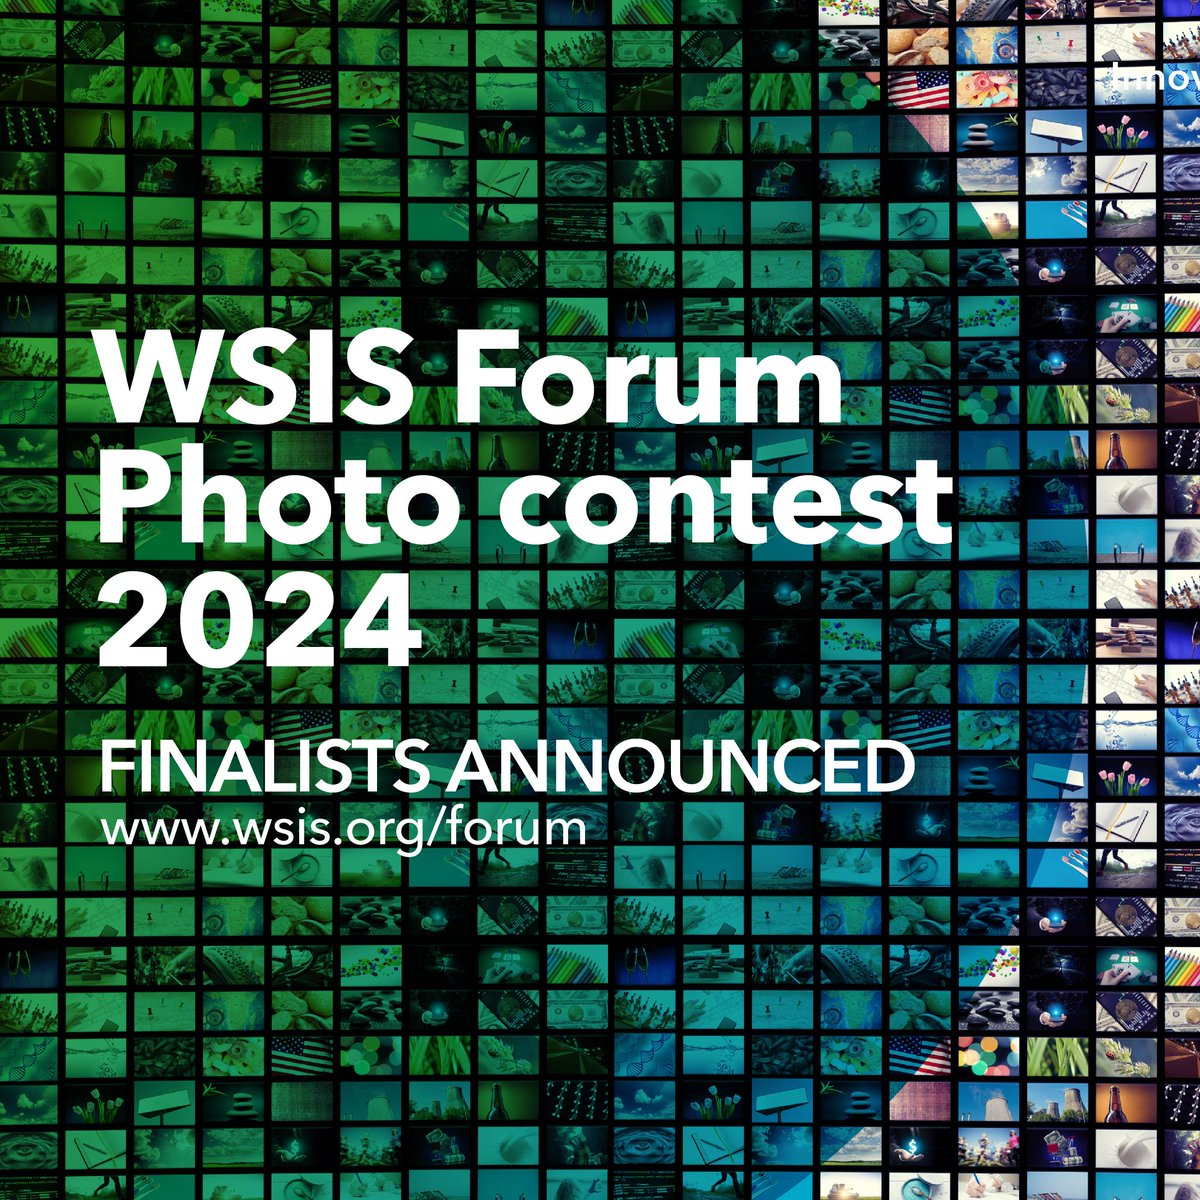 Meet the photos that made it as finalists in the WSIS Photo Contest 2024 ! itu.int/net4/wsis/foru… The winners will be announced during the WSIS+20 Forum High-Level Event, register now!